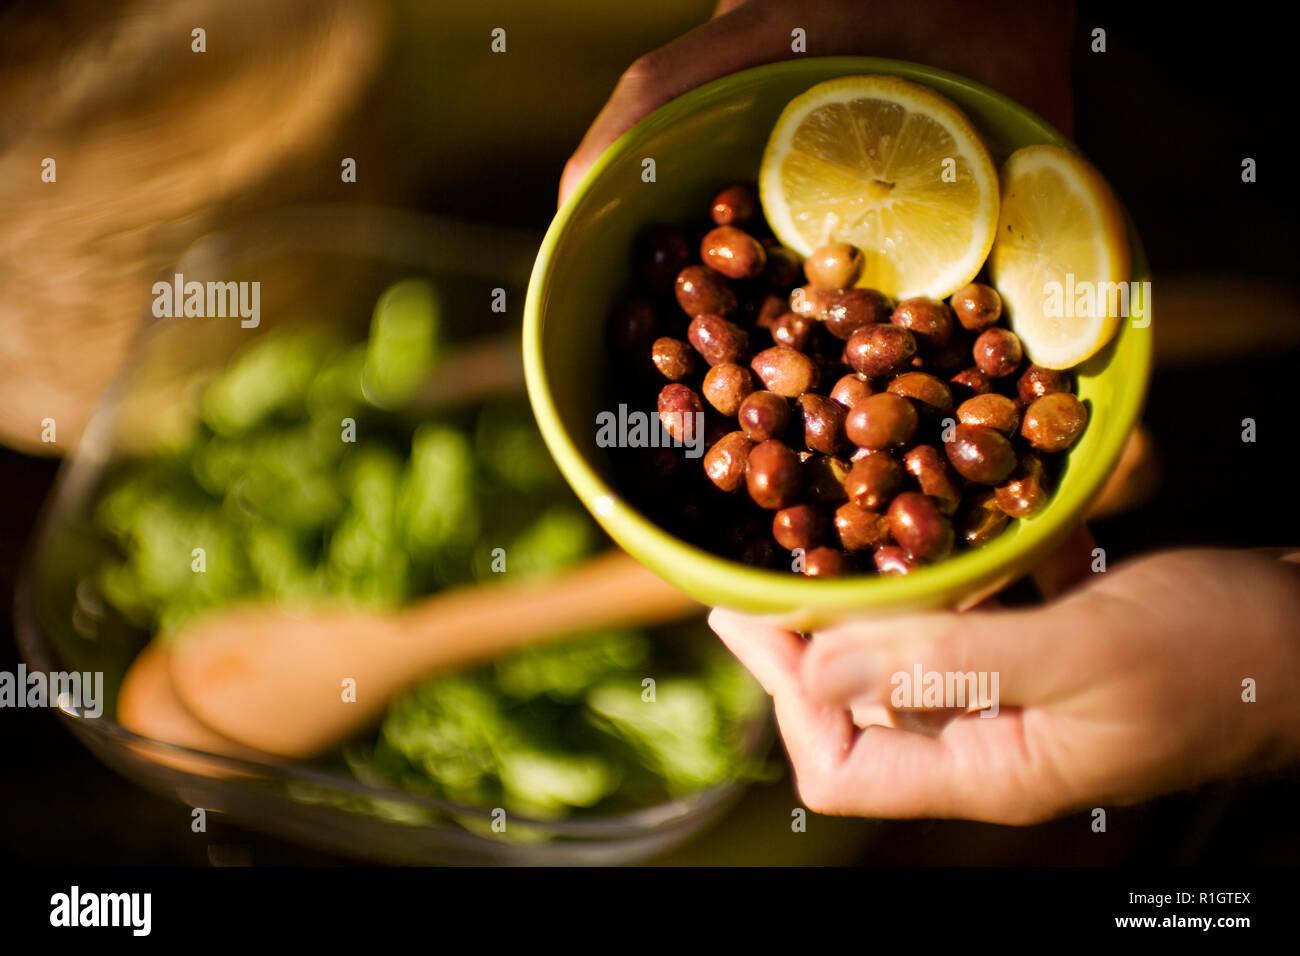 Hands holding a bowl of olives and two lemon slices. Stock Photo